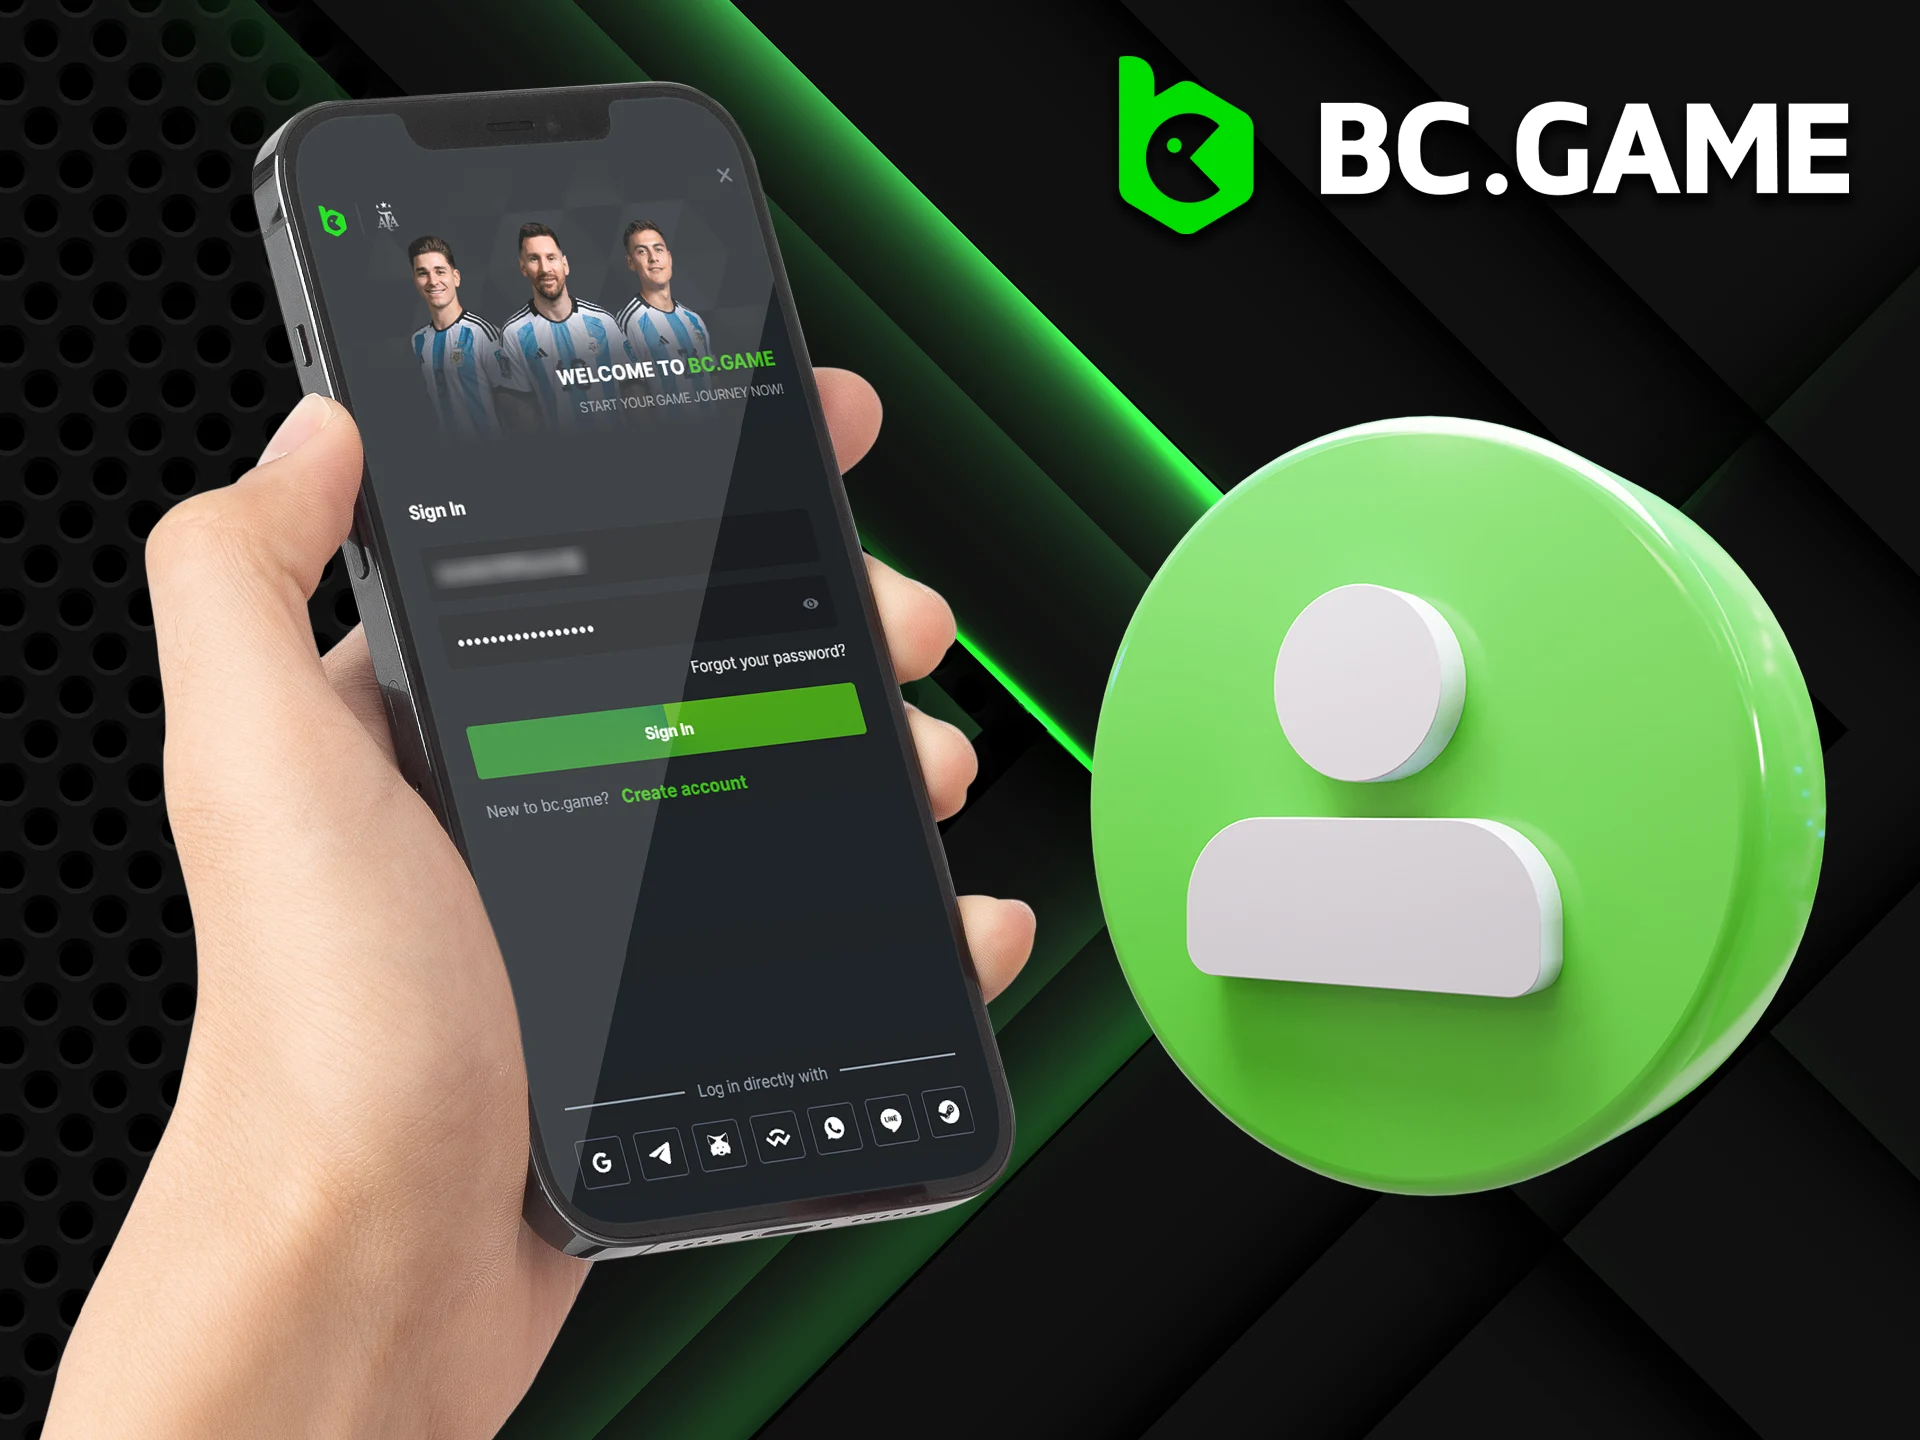 Enter your username and password to log in to the BC GAME app.